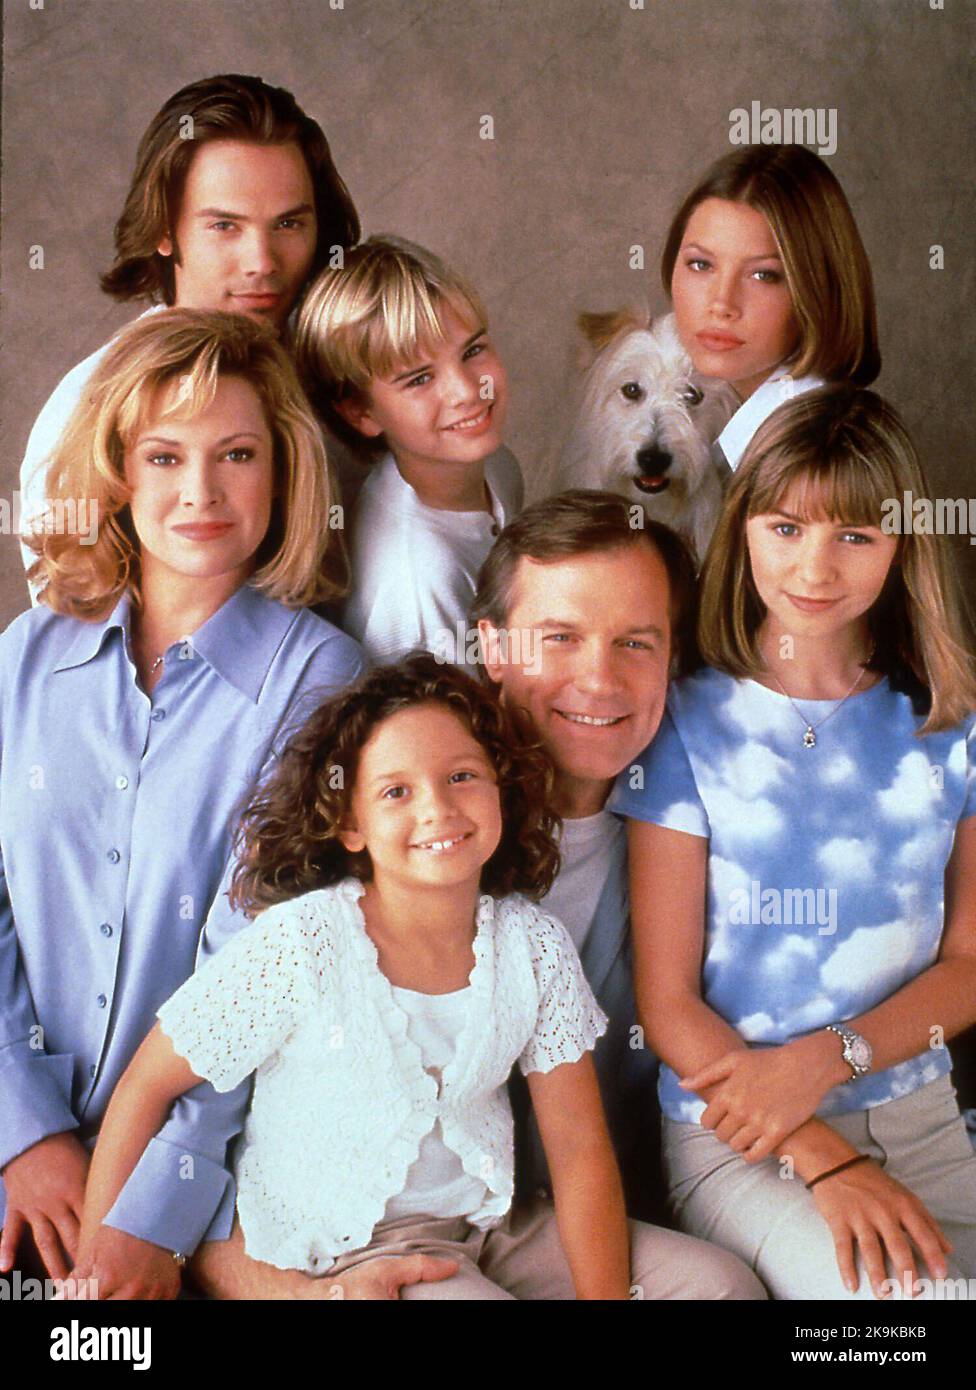 STEPHEN COLLINS, BEVERLEY MITCHELL, DAVID GALLAGHER, CATHERINE HICKS, JESSICA BIEL, BARRY WATSON and MACKENZIE ROSMAN in 7TH HEAVEN (1996), directed by BURT BACHARACH and TONY MORDENTE. Credit: Spelling Television / Album Stock Photo